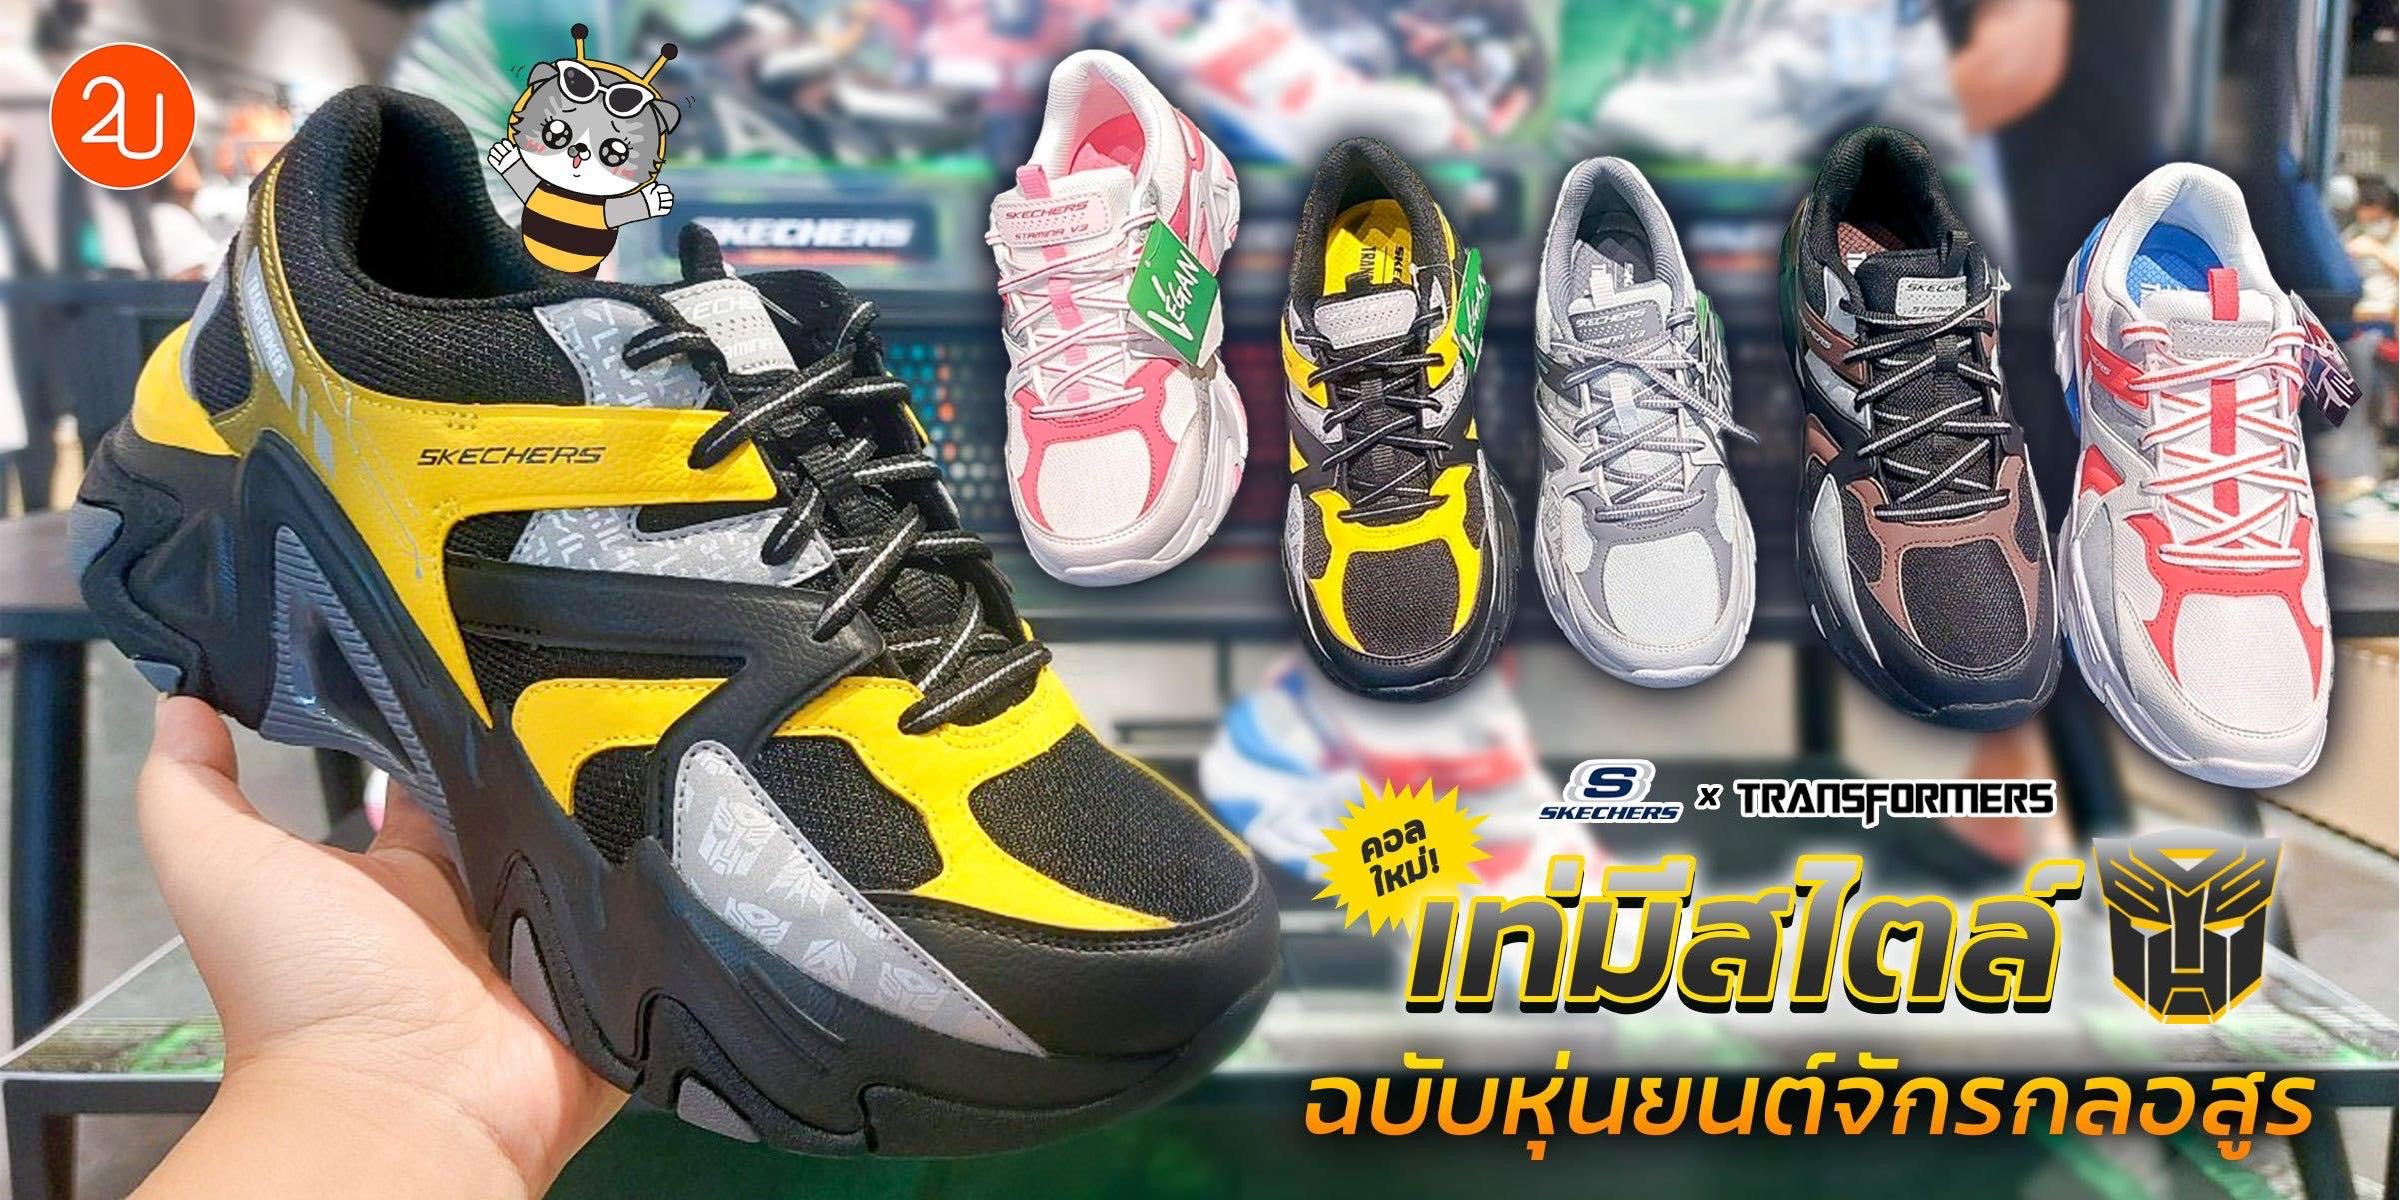 2U New Collection Skechers TRANSFORMERS COVEr